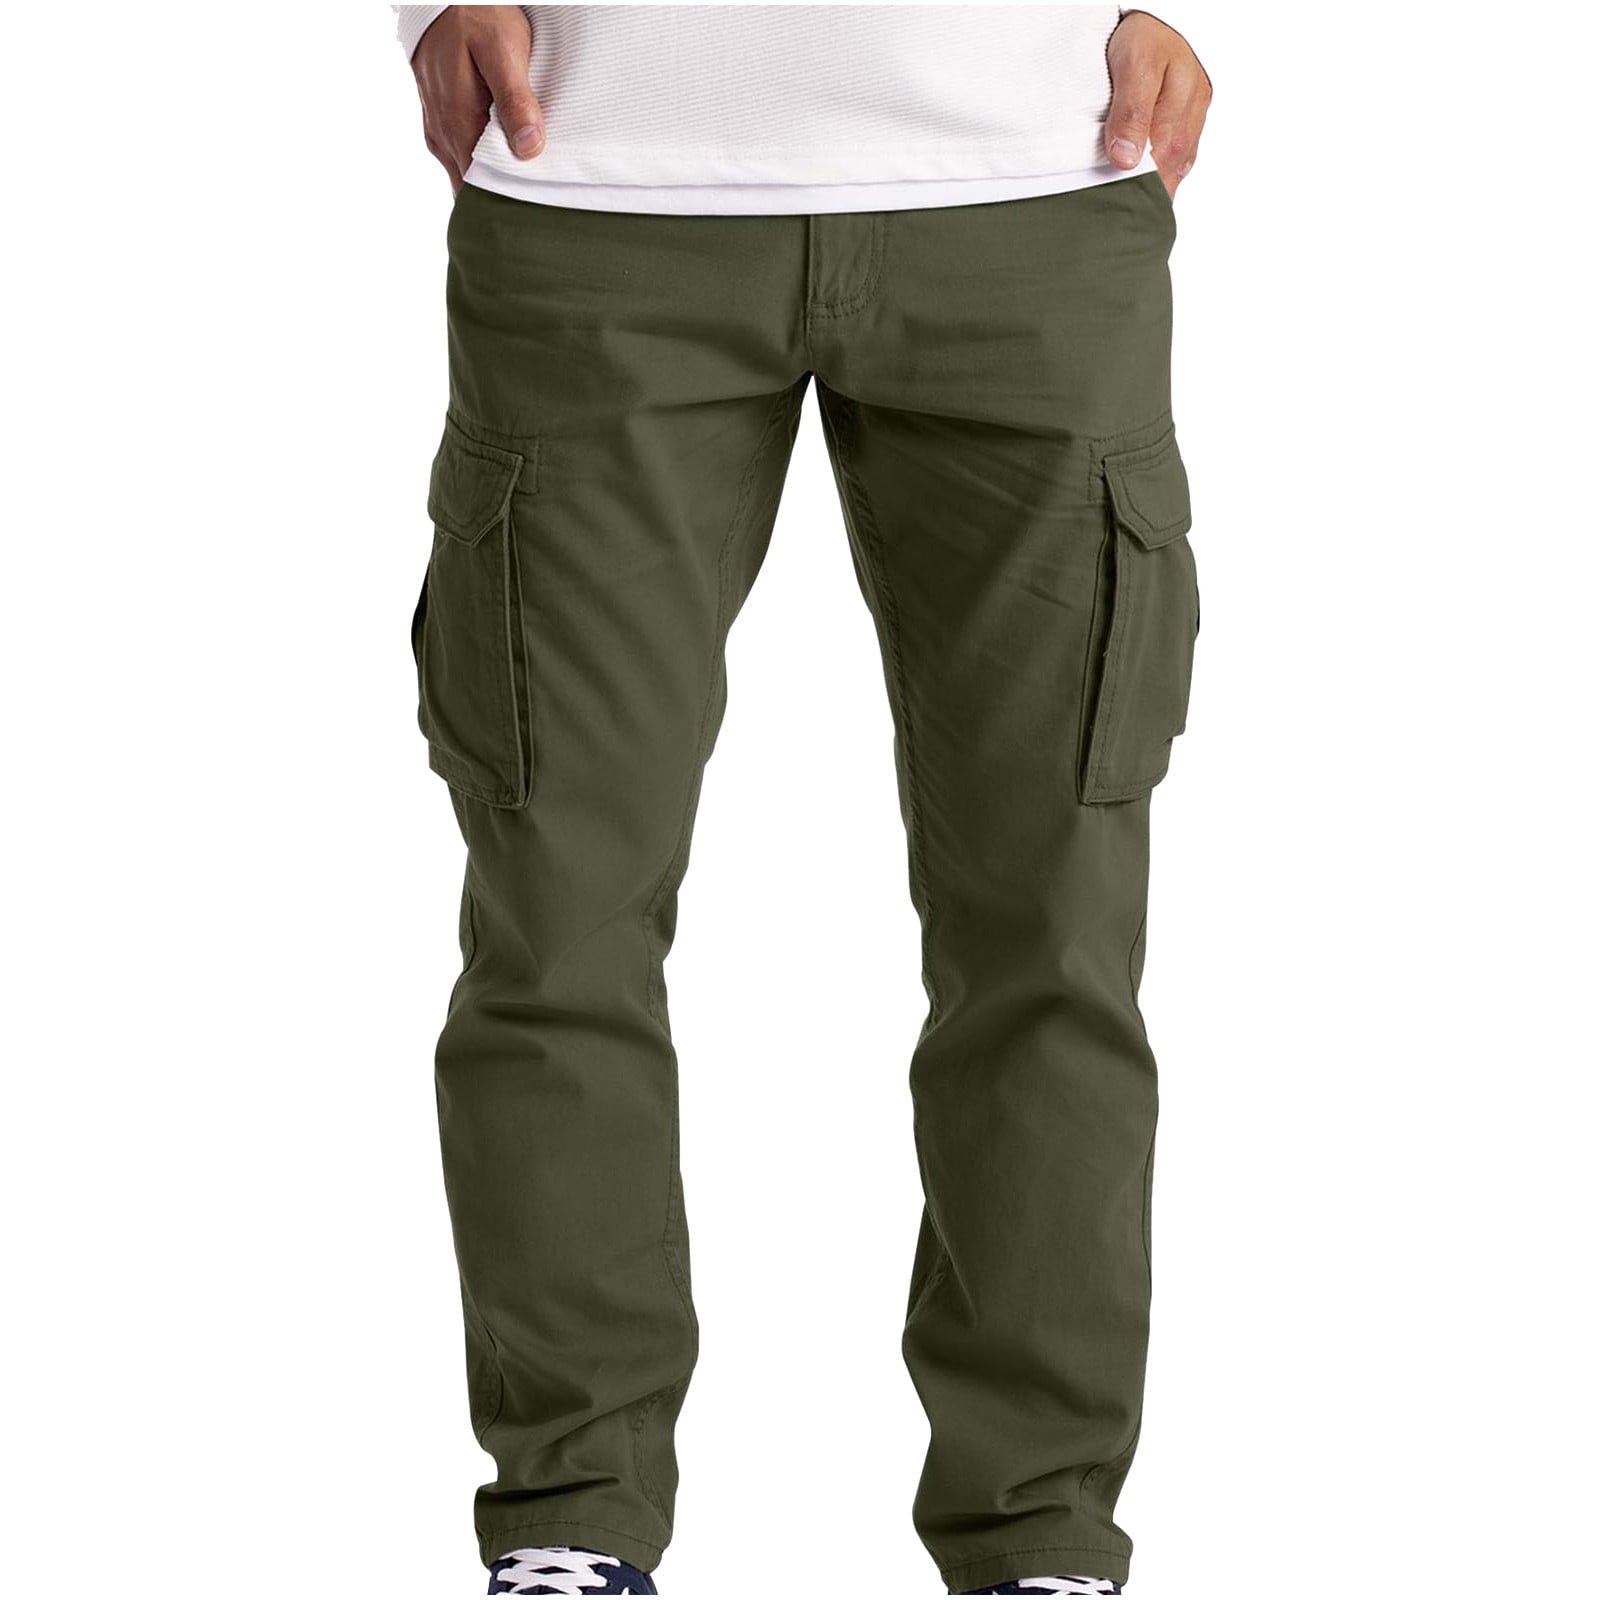 2023 Cargo Pants for Men on Clearance Solid Color Plus Size Cargo Trousers  Work Wear Combat Cargo 6 Pocket Full Pants